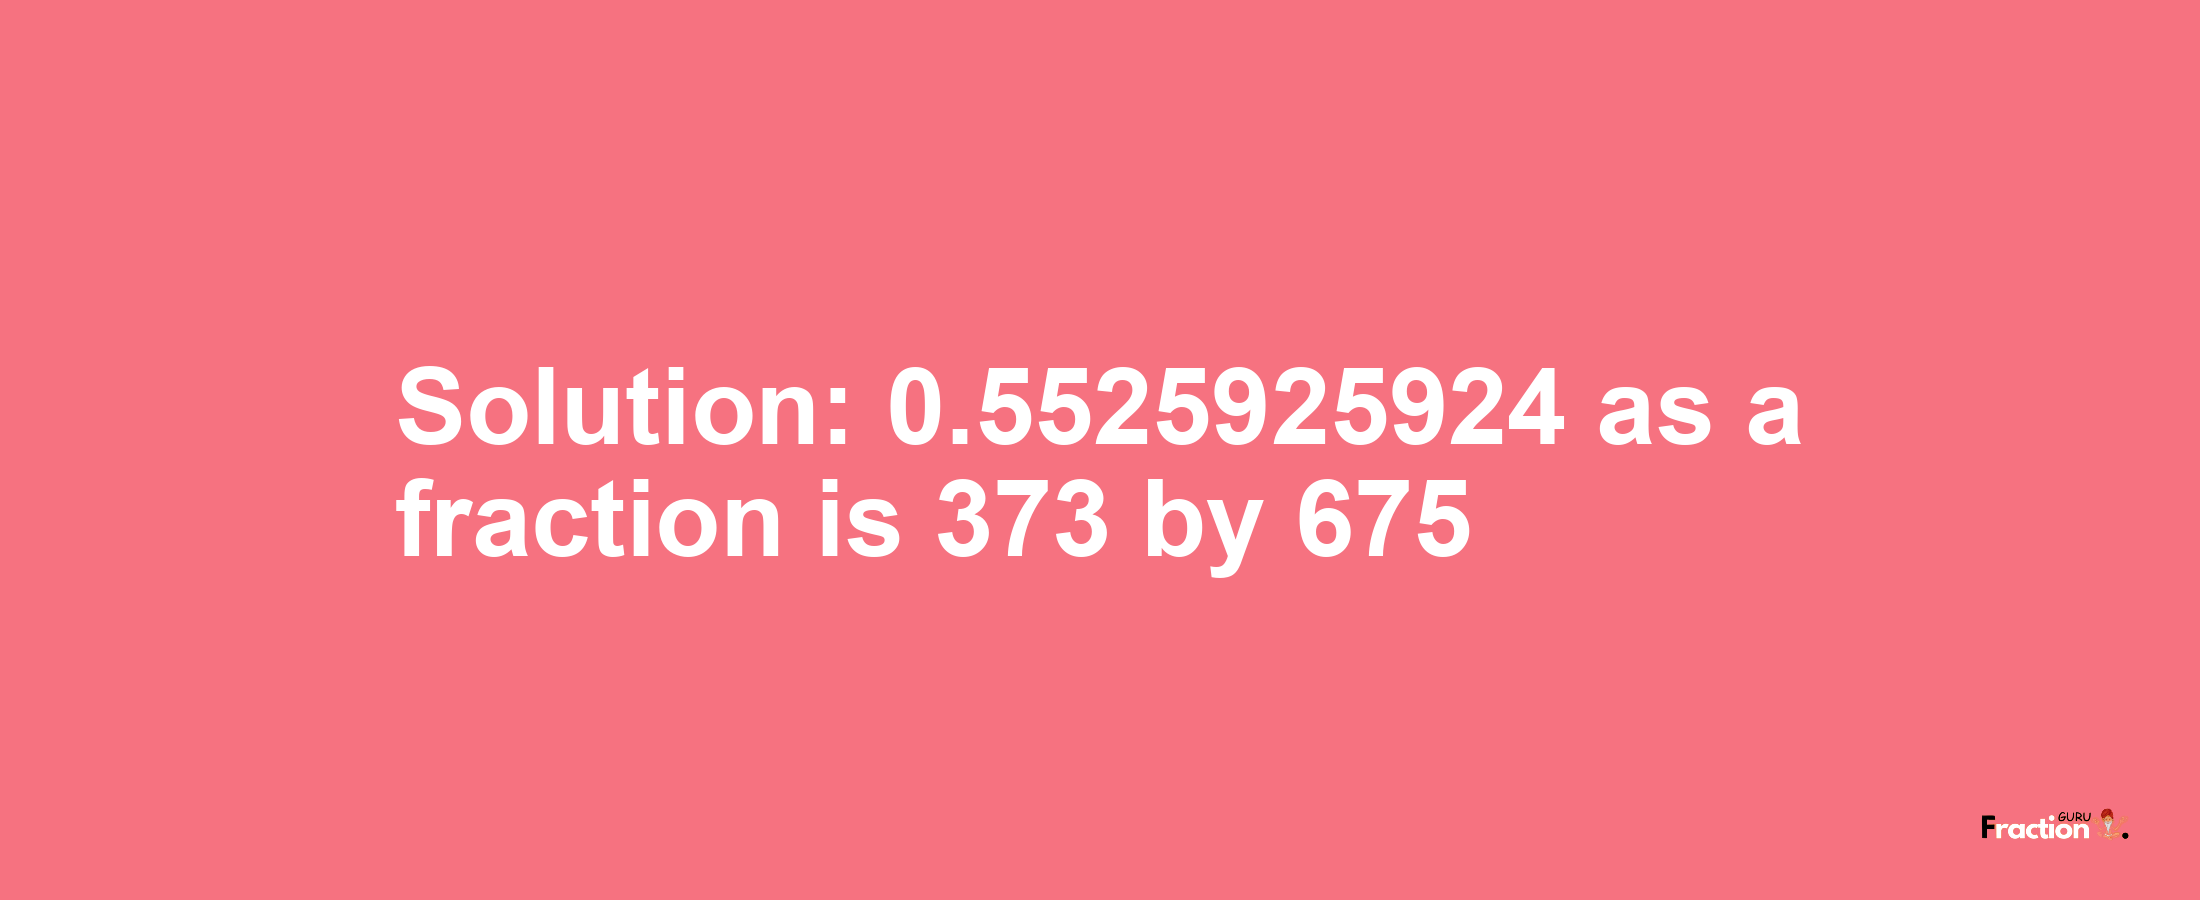 Solution:0.5525925924 as a fraction is 373/675